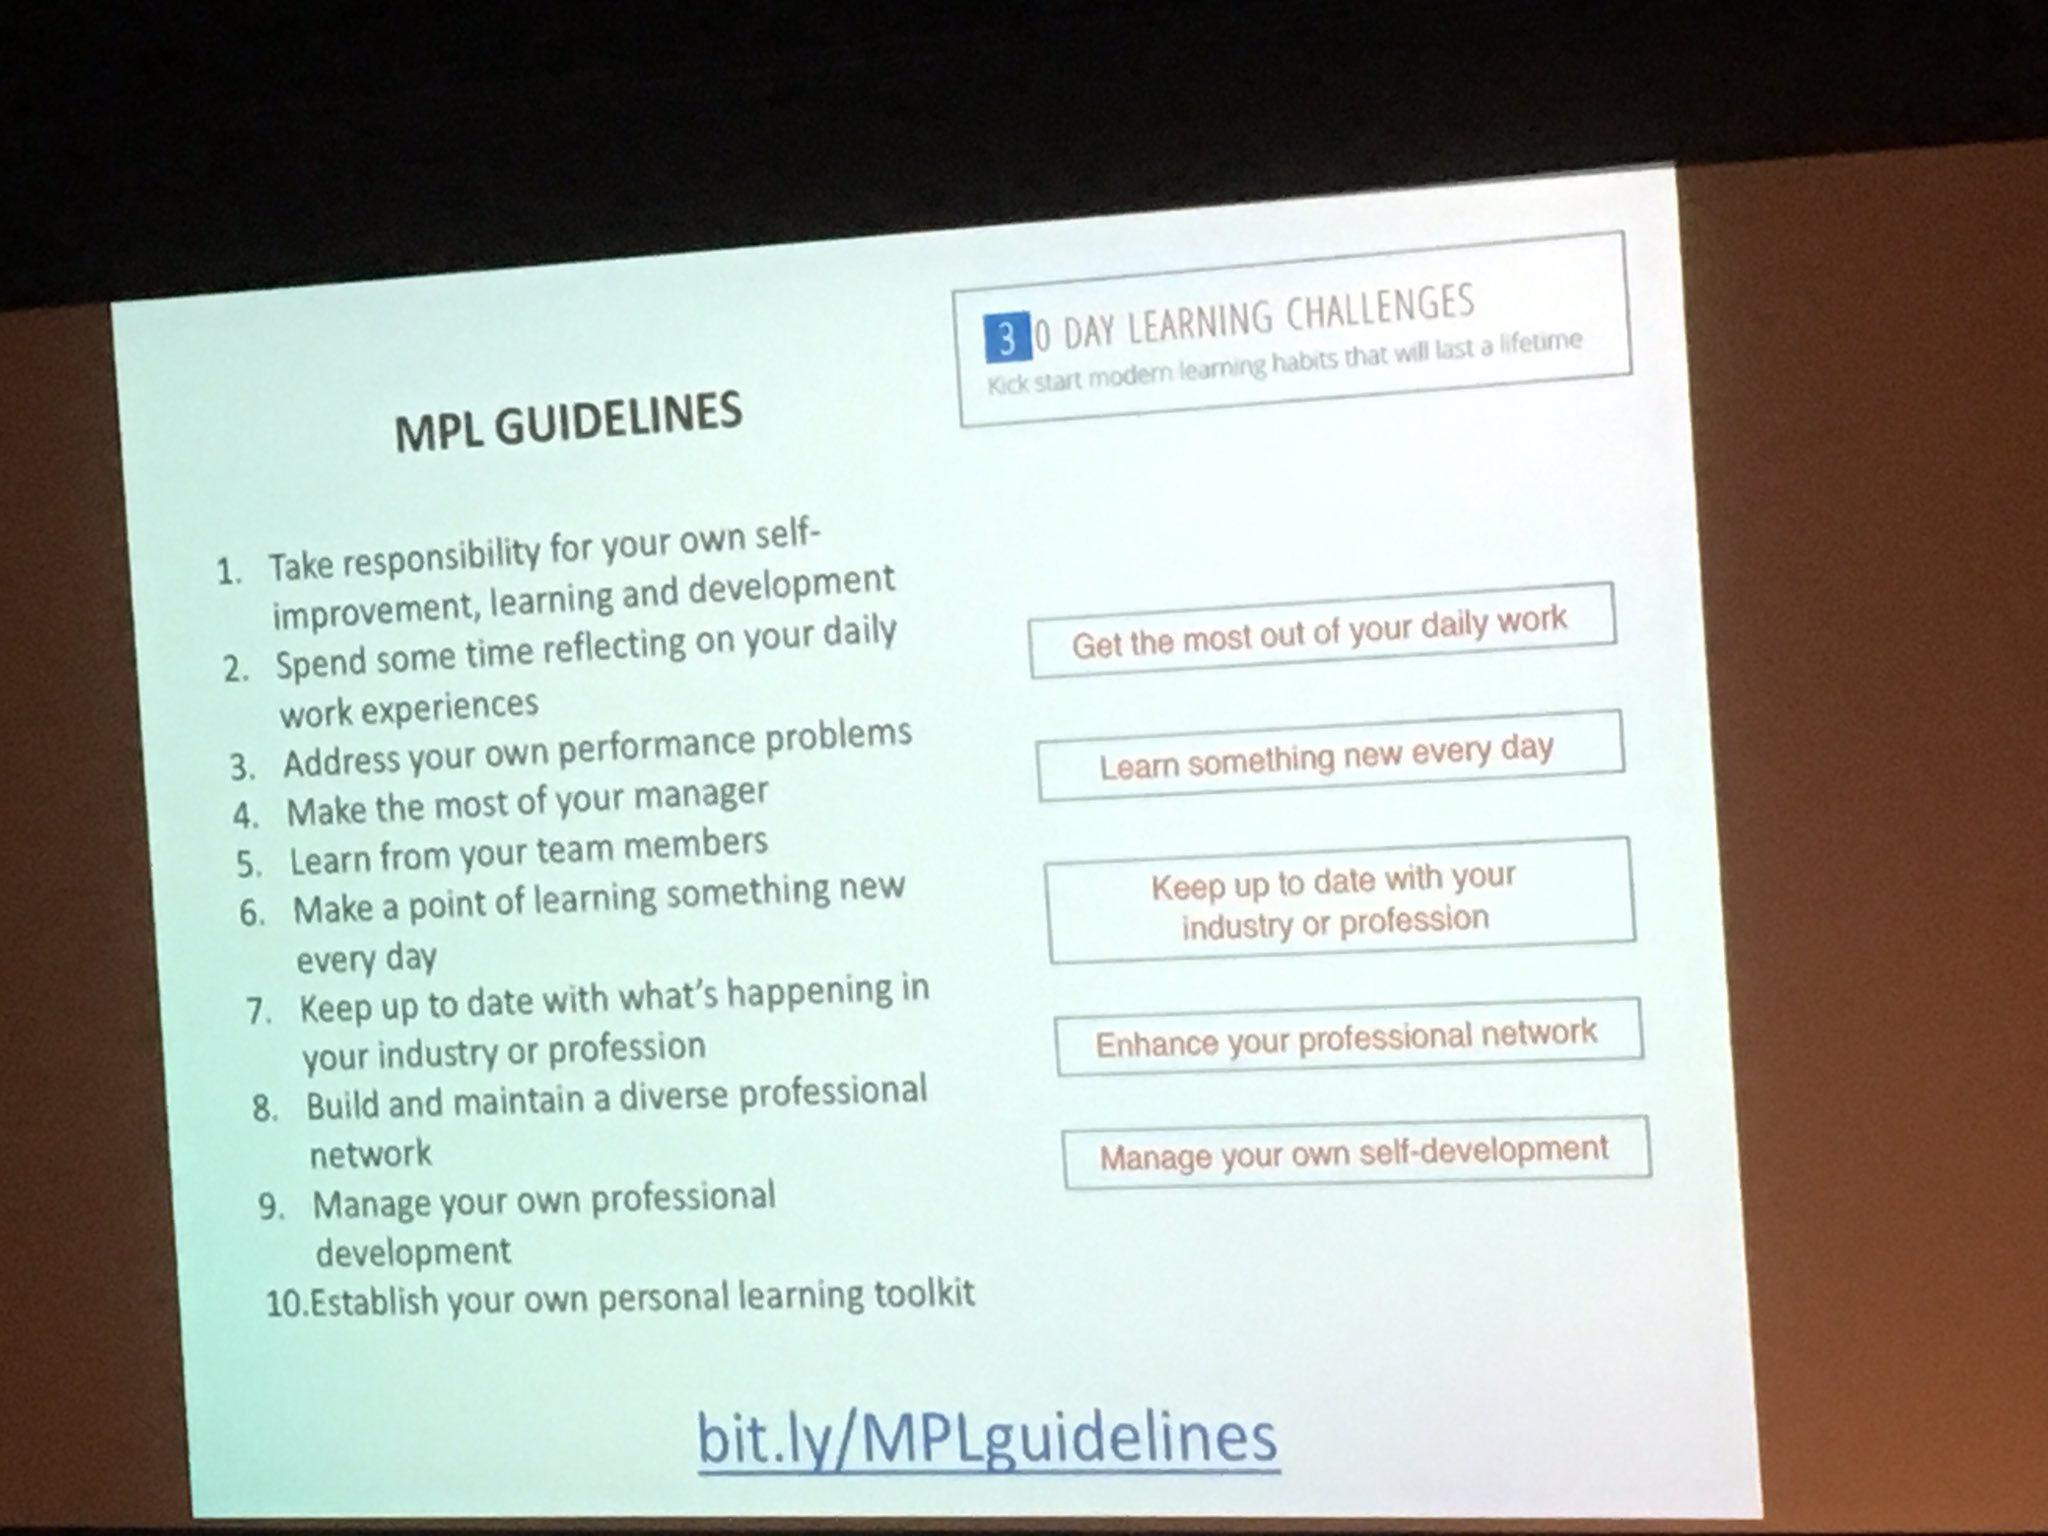 Overview of @C4LPT guidelines and 30 day habits details on the website. I definitely will check this out. #SUSALT17 https://t.co/WhHuEsQnkF